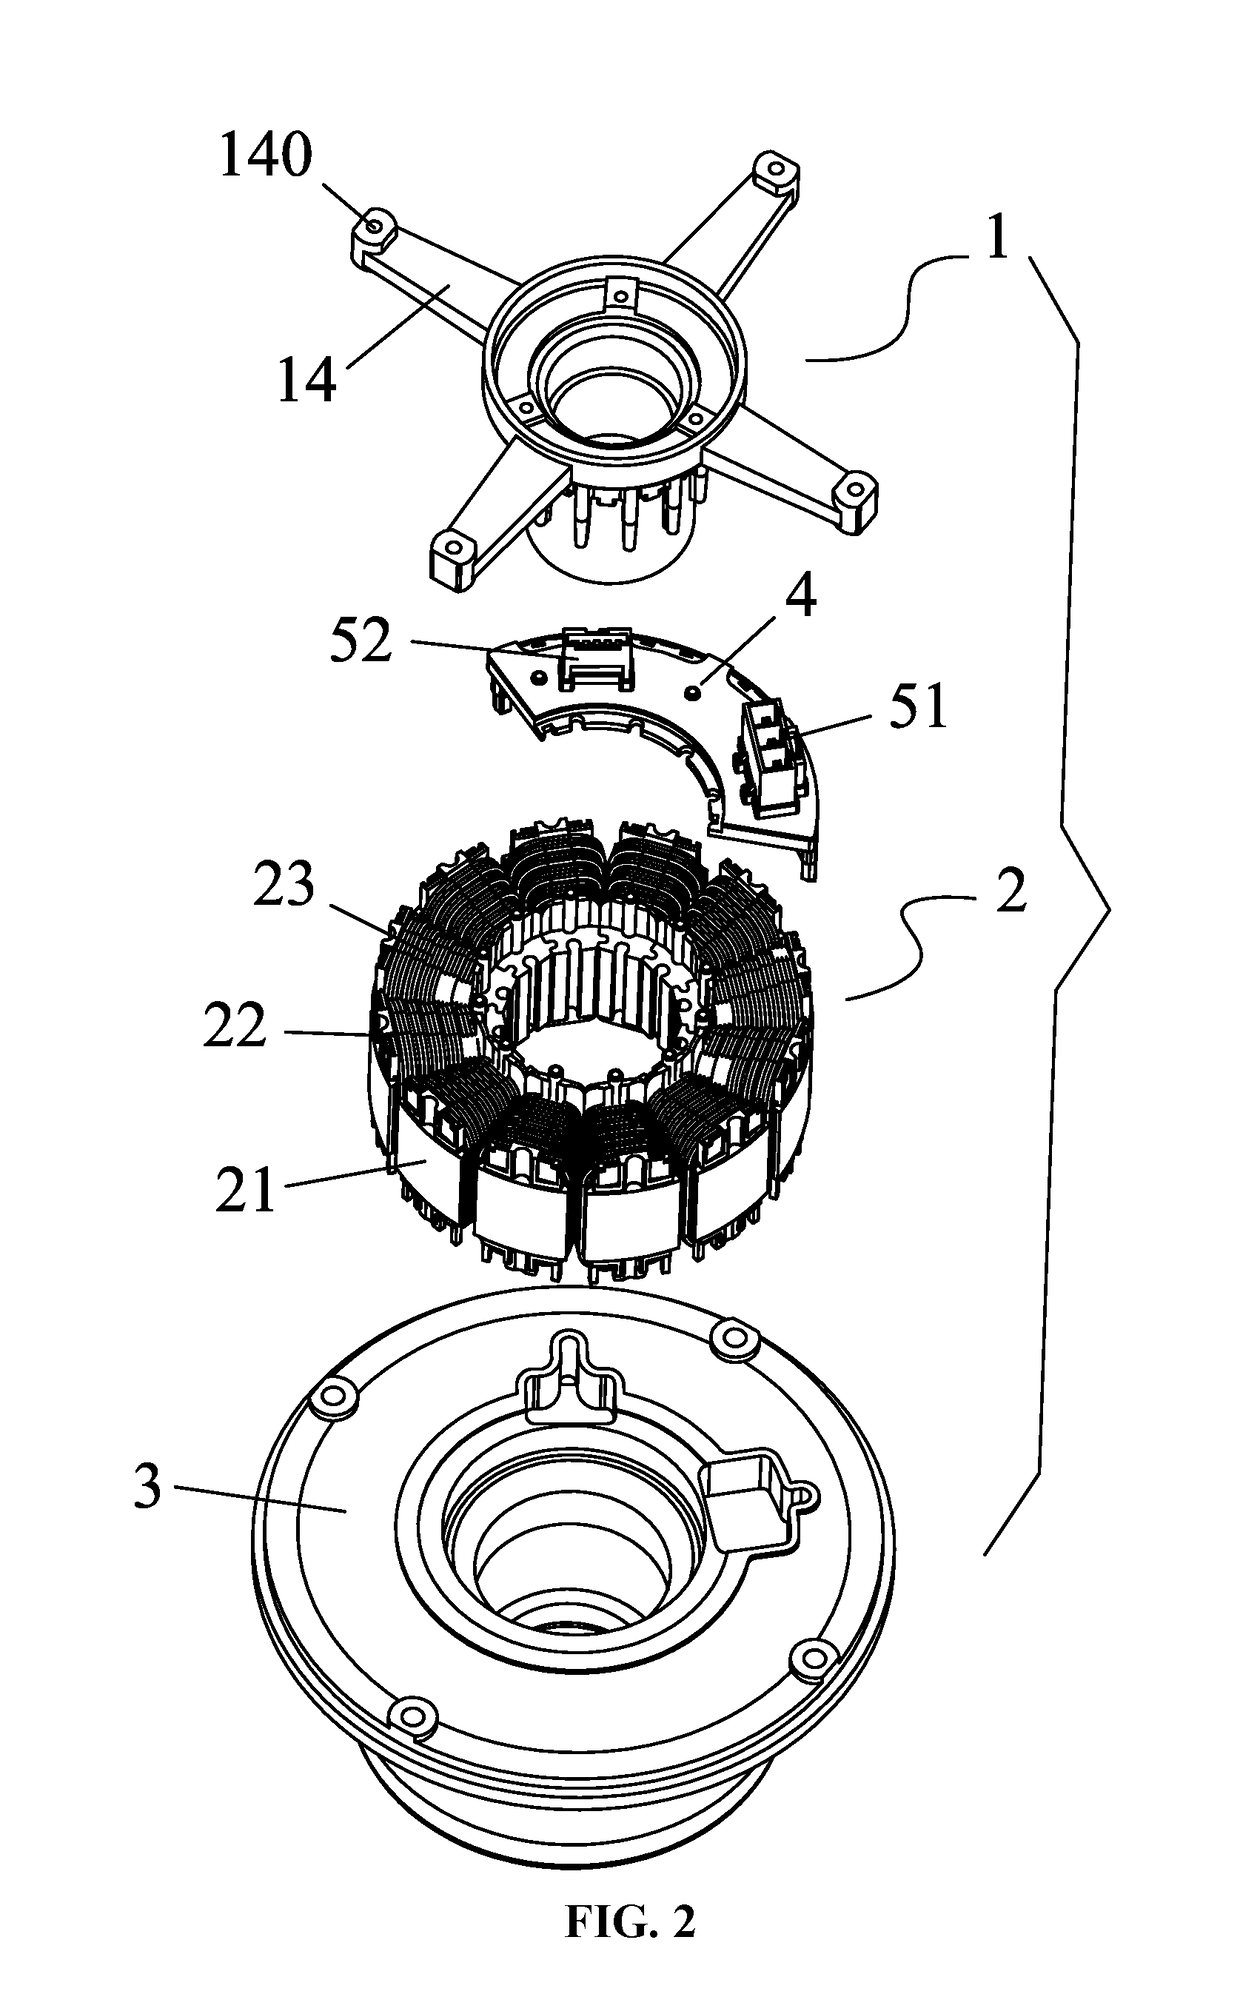 Plastic-packaged stator and external rotor motor comprising the same